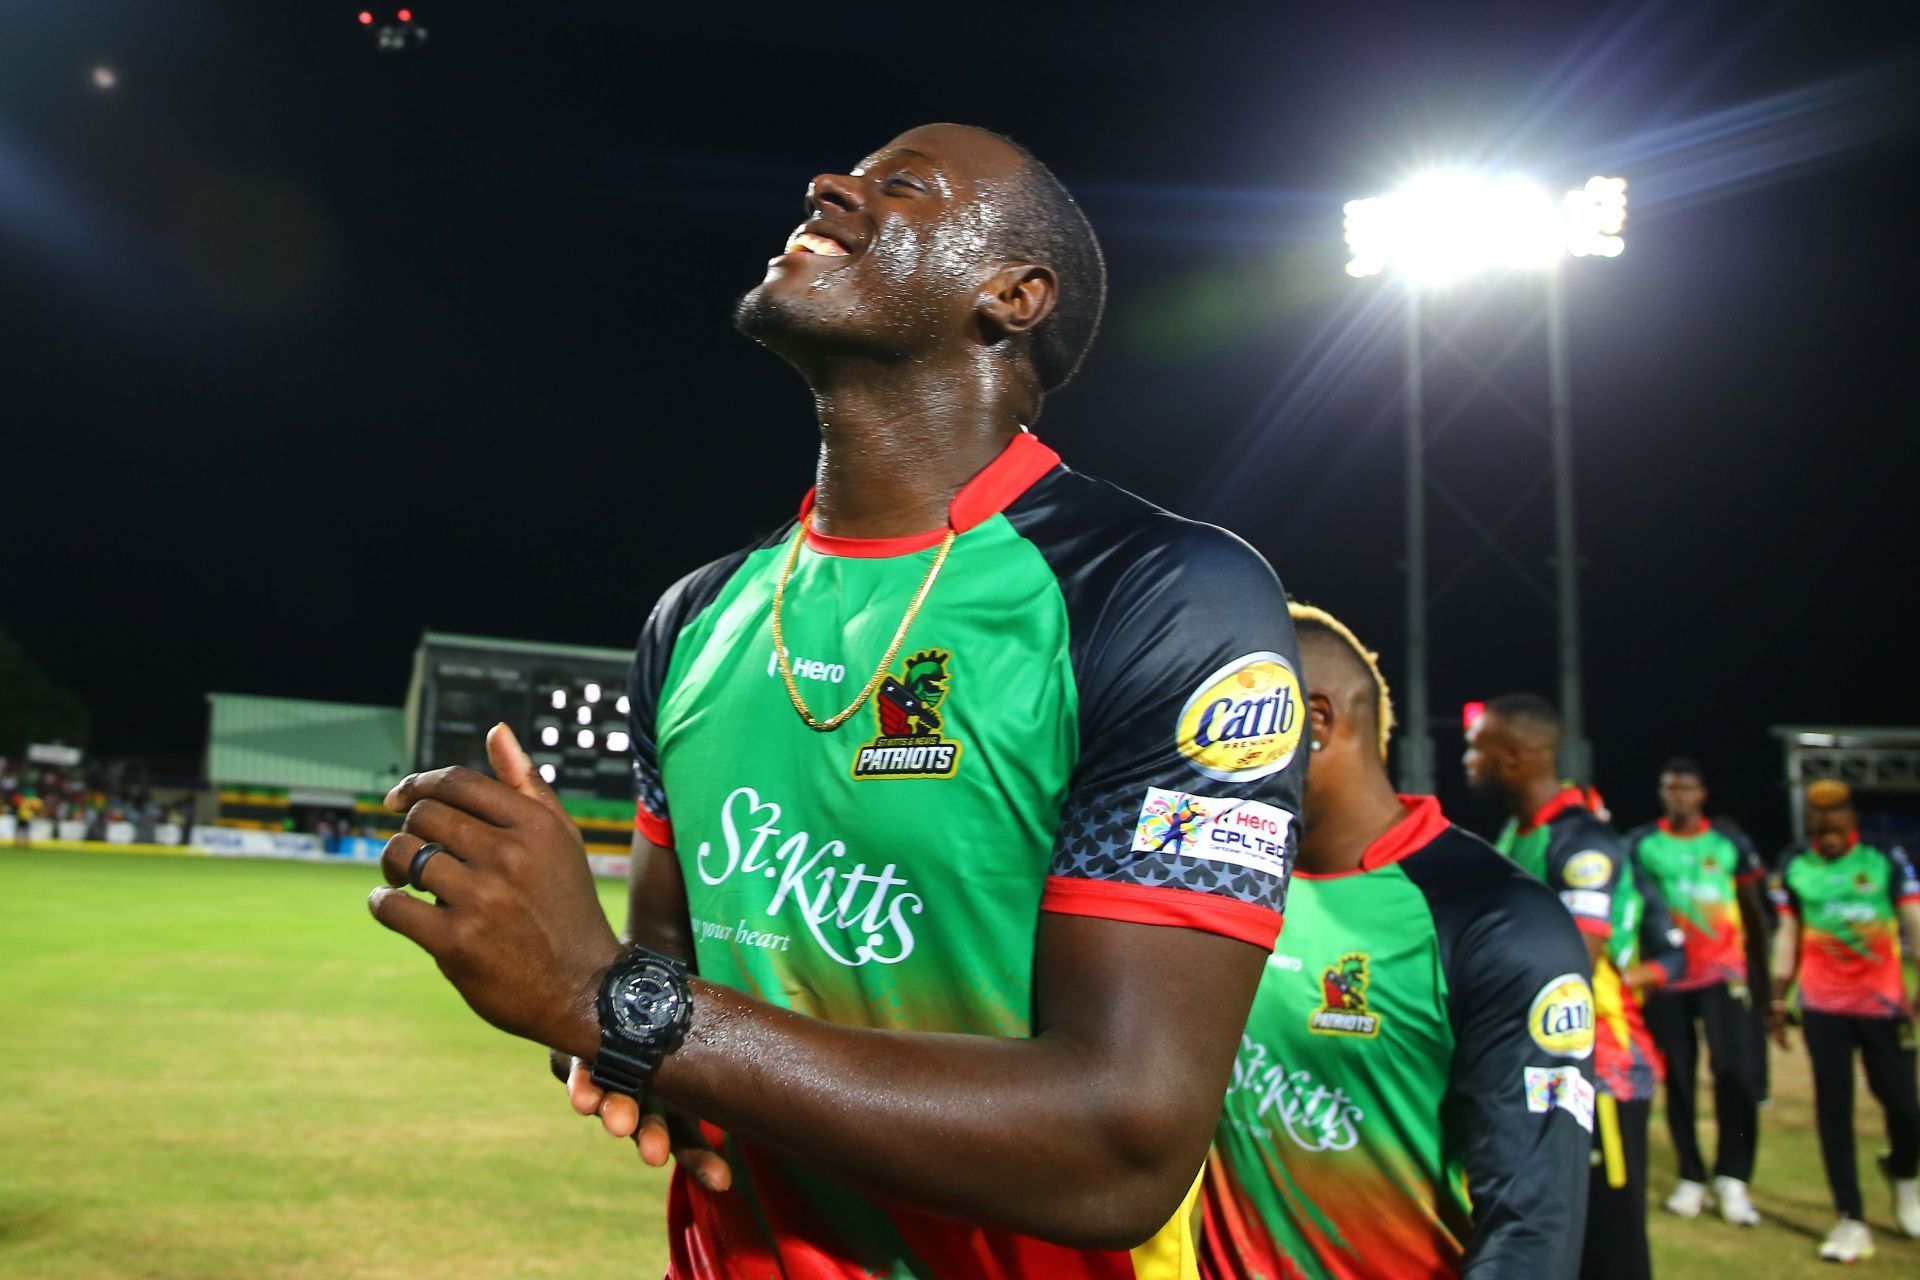 Braithwaite picked up 4 wickets in his most recent Abu Dhabi T10 League match